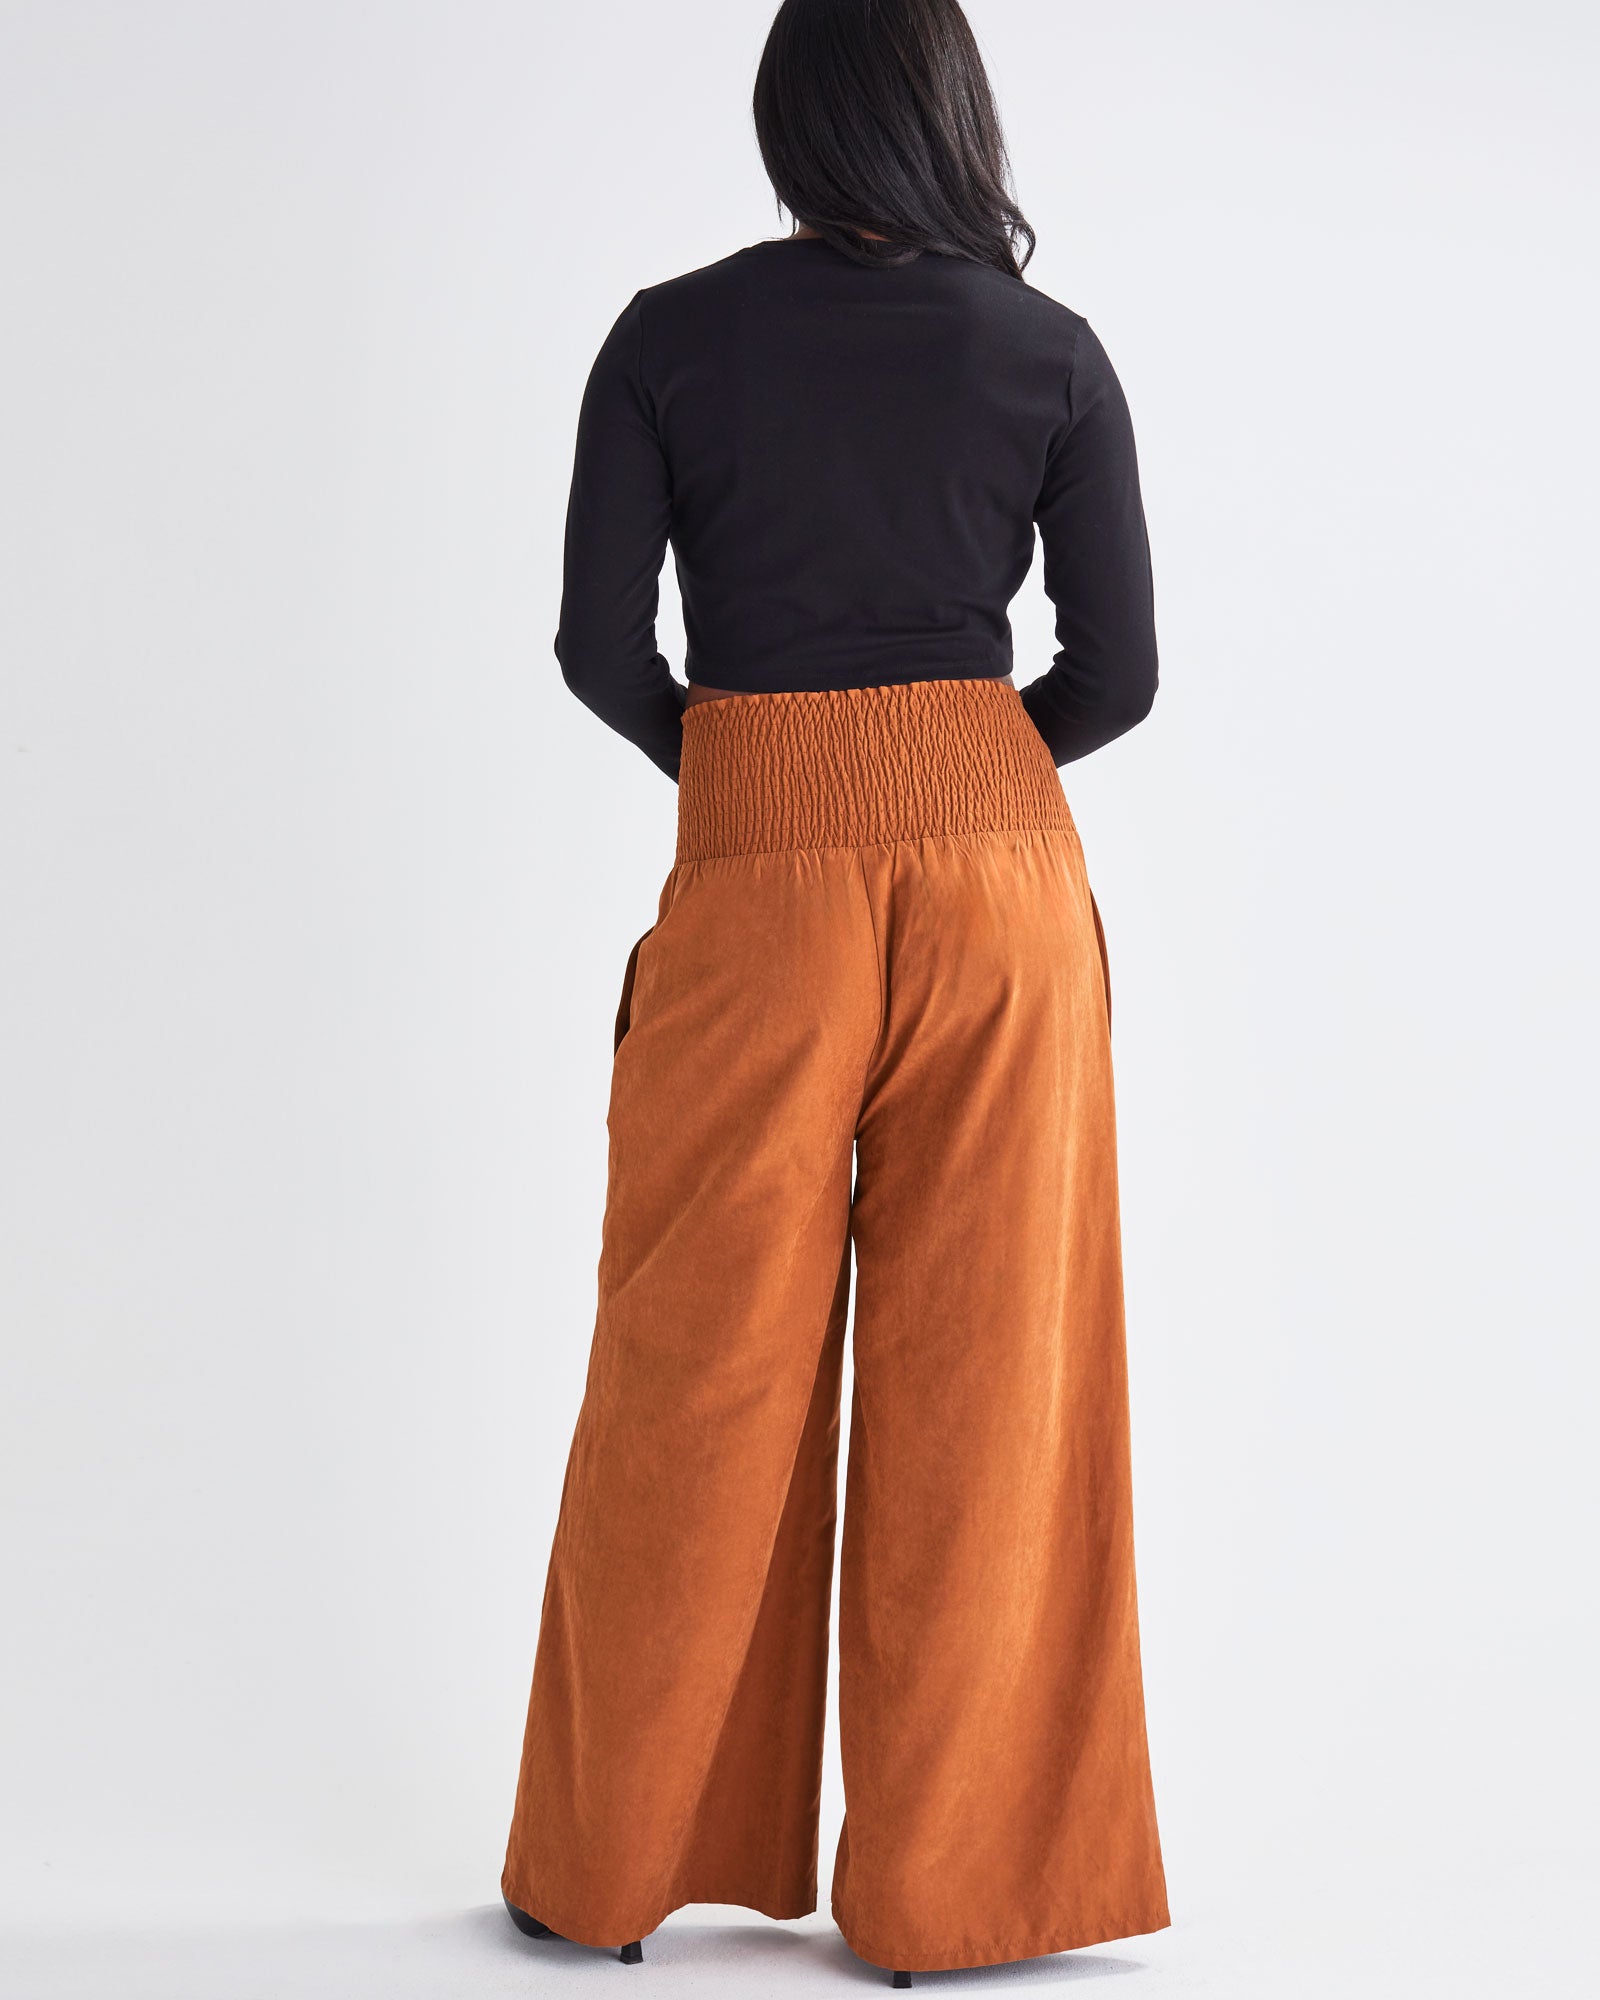 Back View - A Pregnant Woman Wearing Wide Leg Maternity Pants in Brown from Angel Maternity